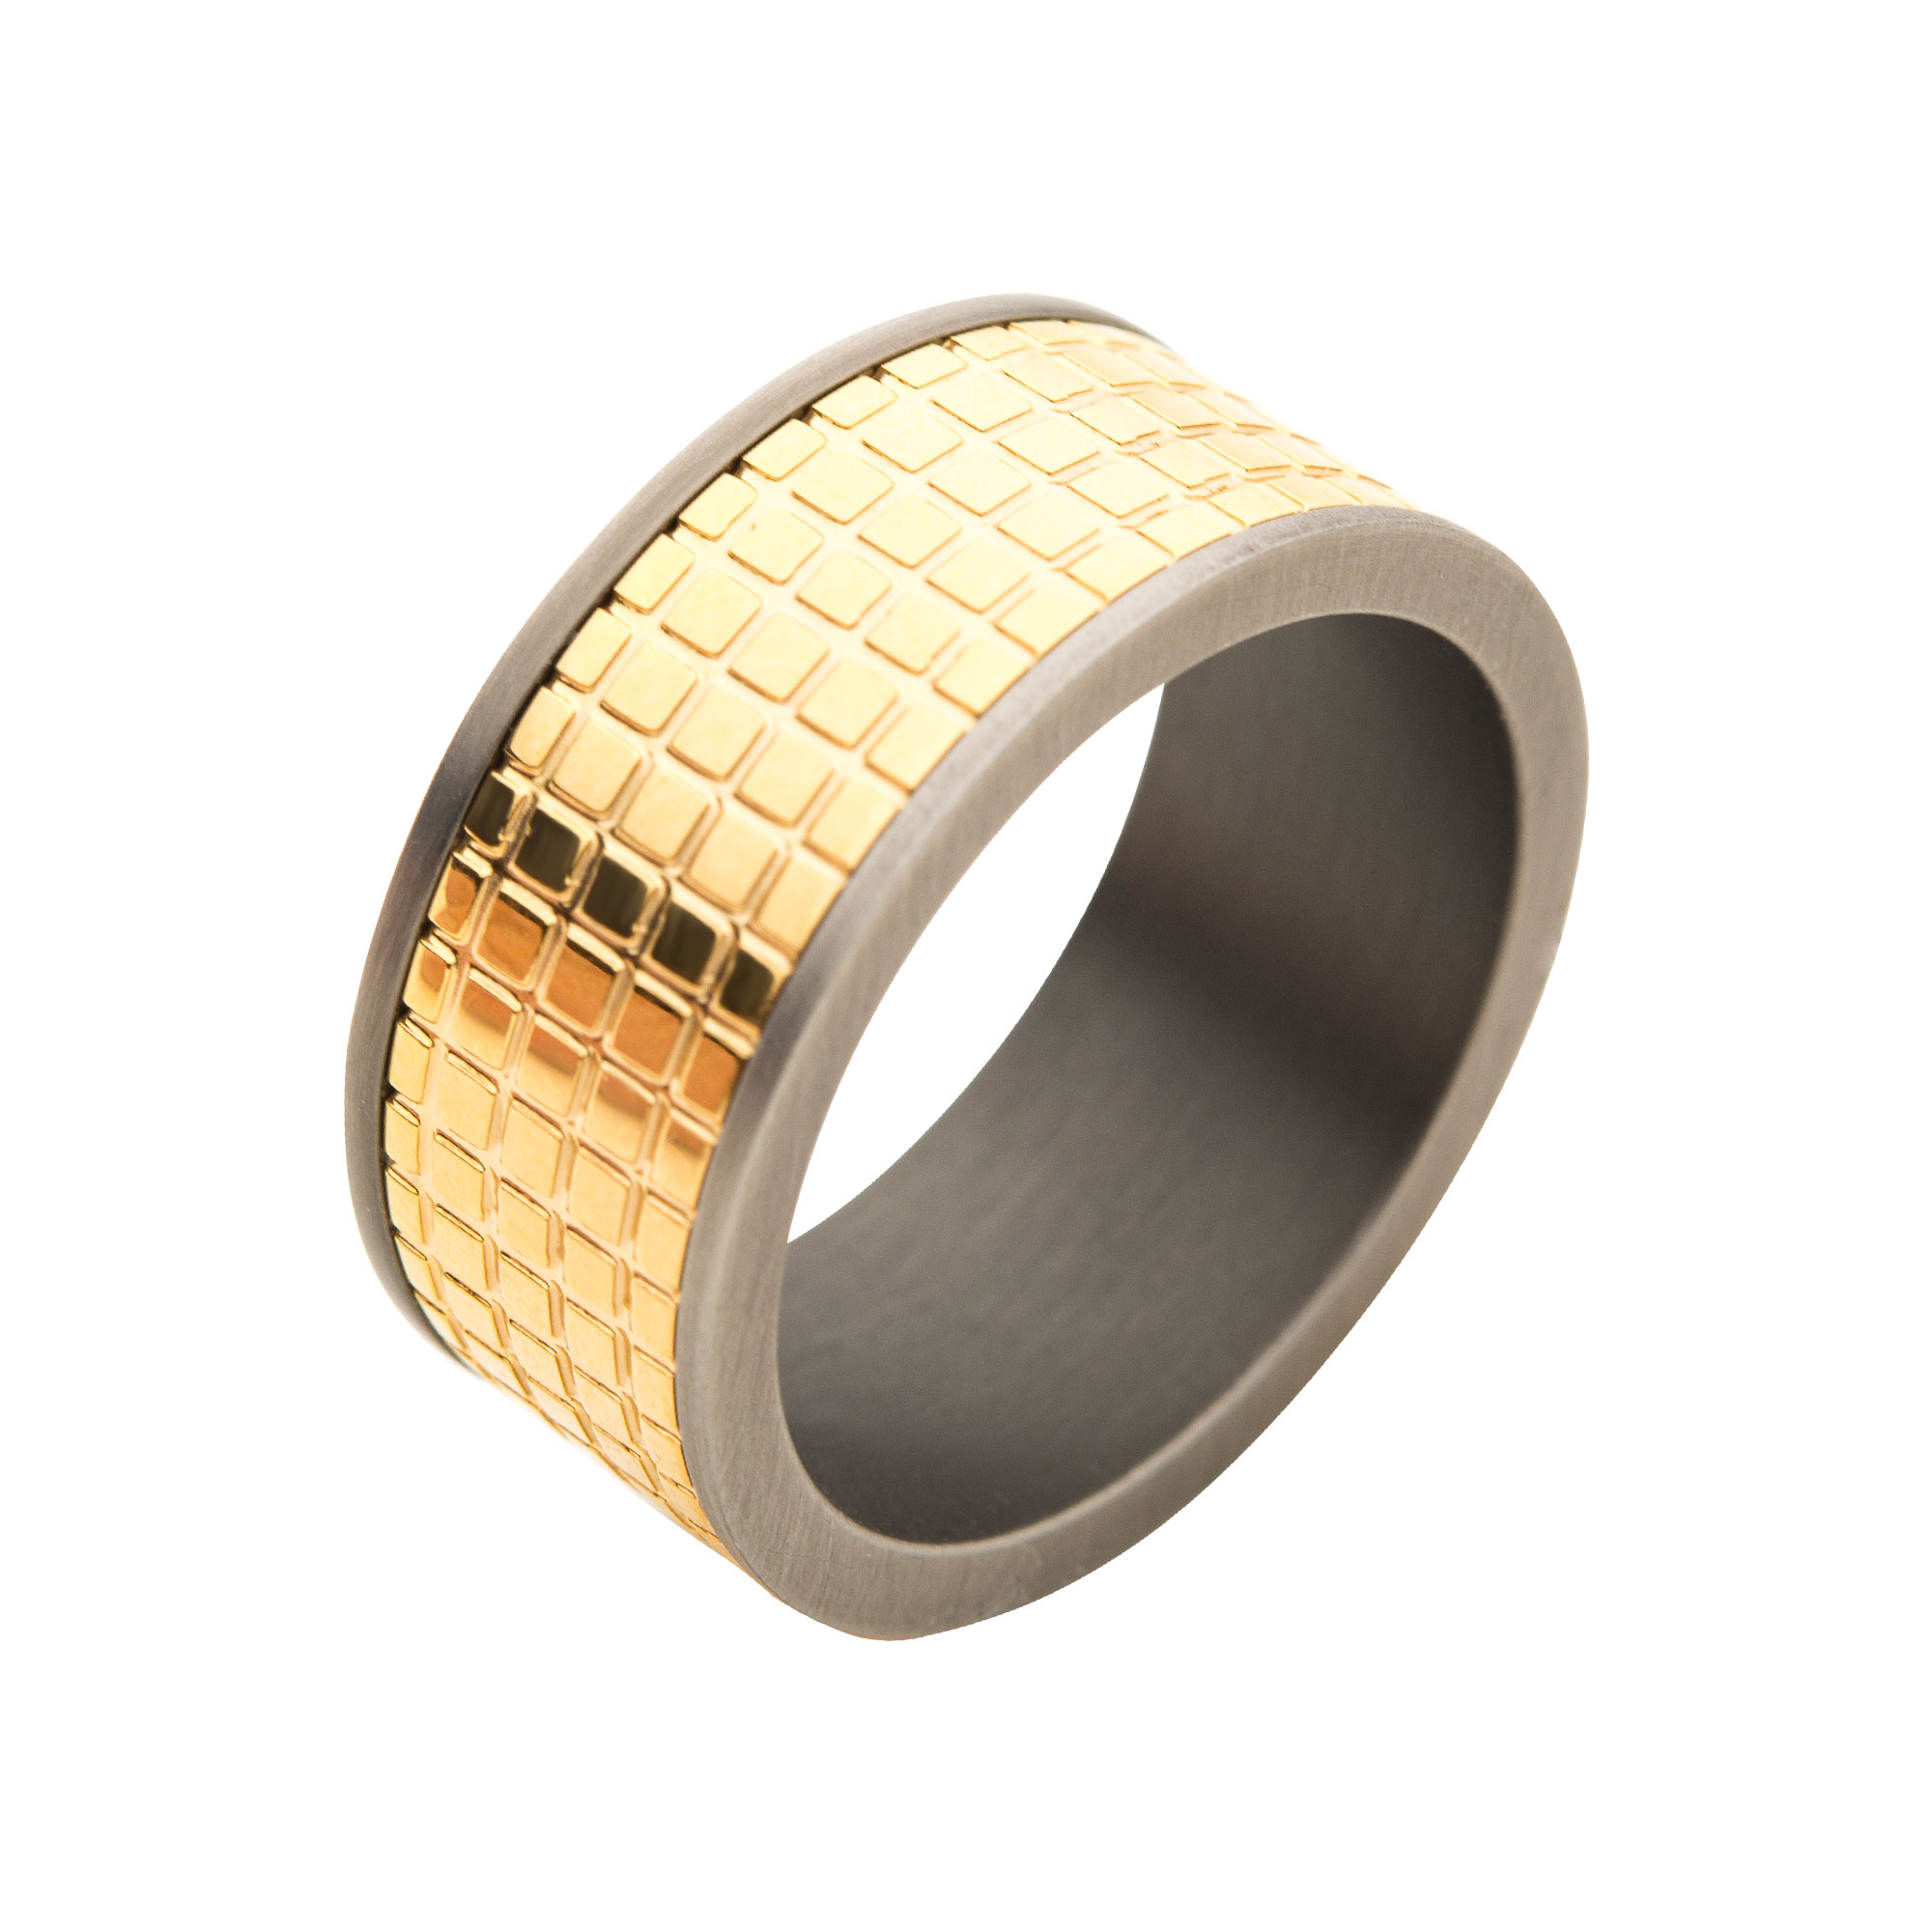 Gun Metal Plated with 18K Gold Plated Grid Inlay Ring Lewis Jewelers, Inc. Ansonia, CT